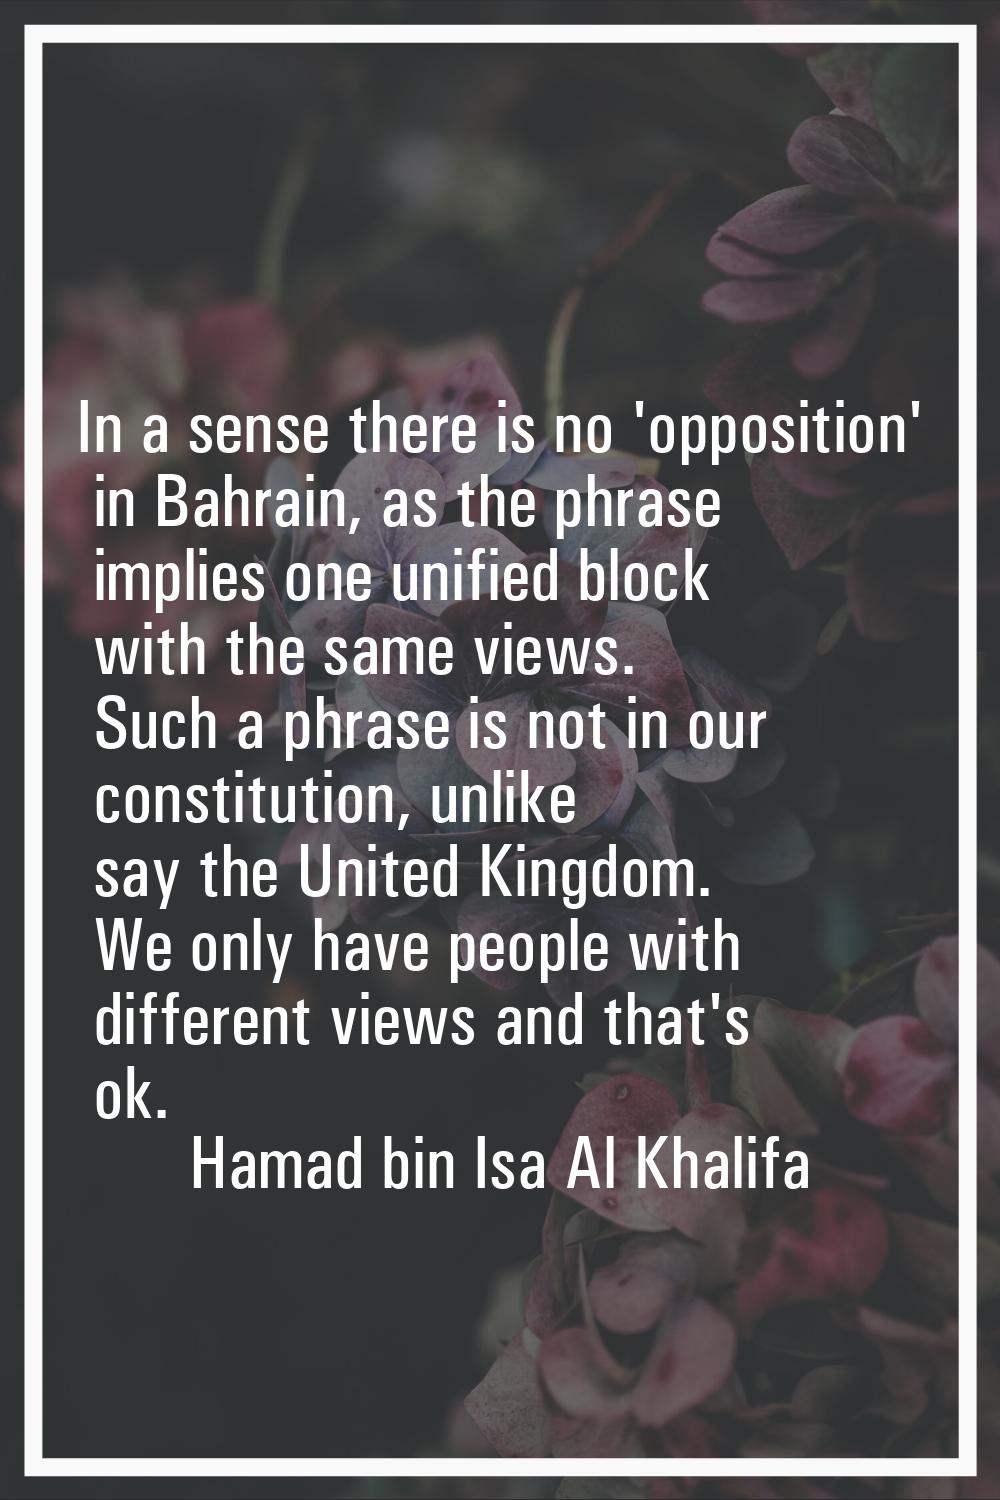 In a sense there is no 'opposition' in Bahrain, as the phrase implies one unified block with the sa